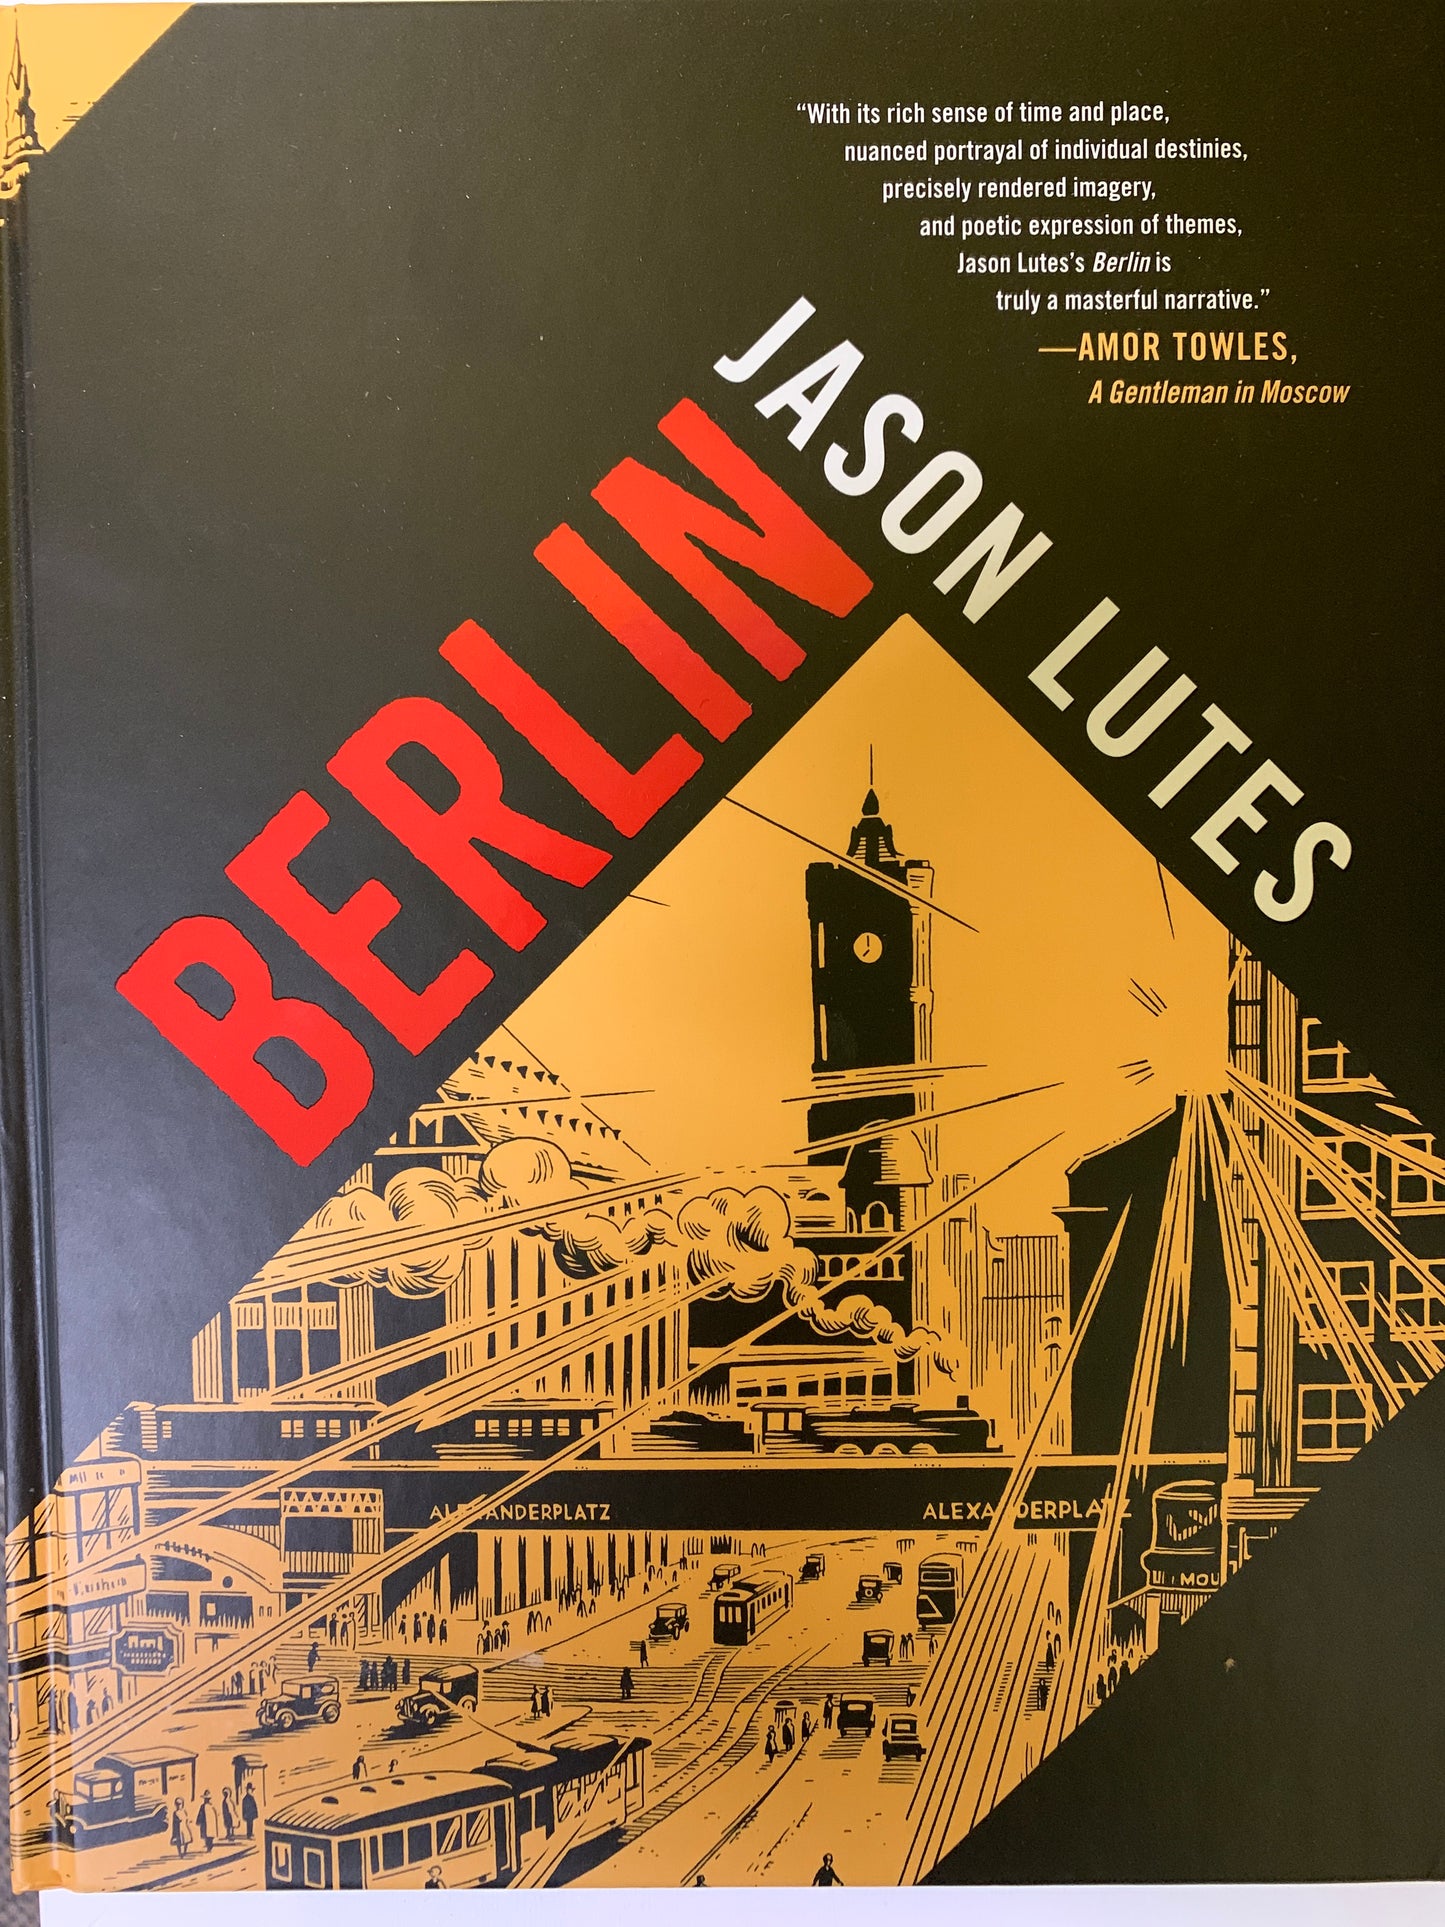 Berlin: Complete Collection